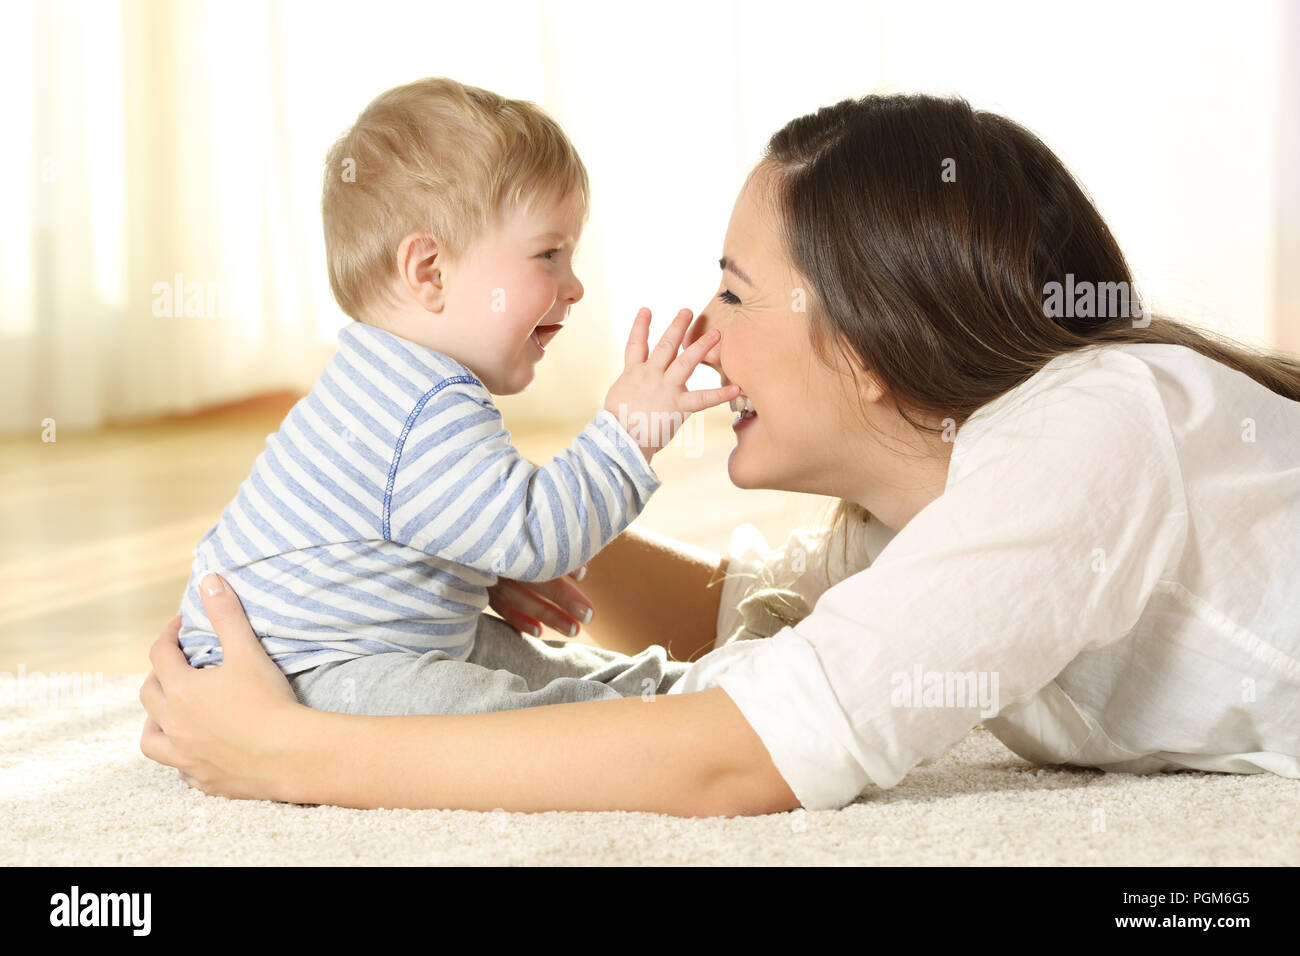 Affectionate mother and baby playing together on a carpet on the floor at home Stock Photo